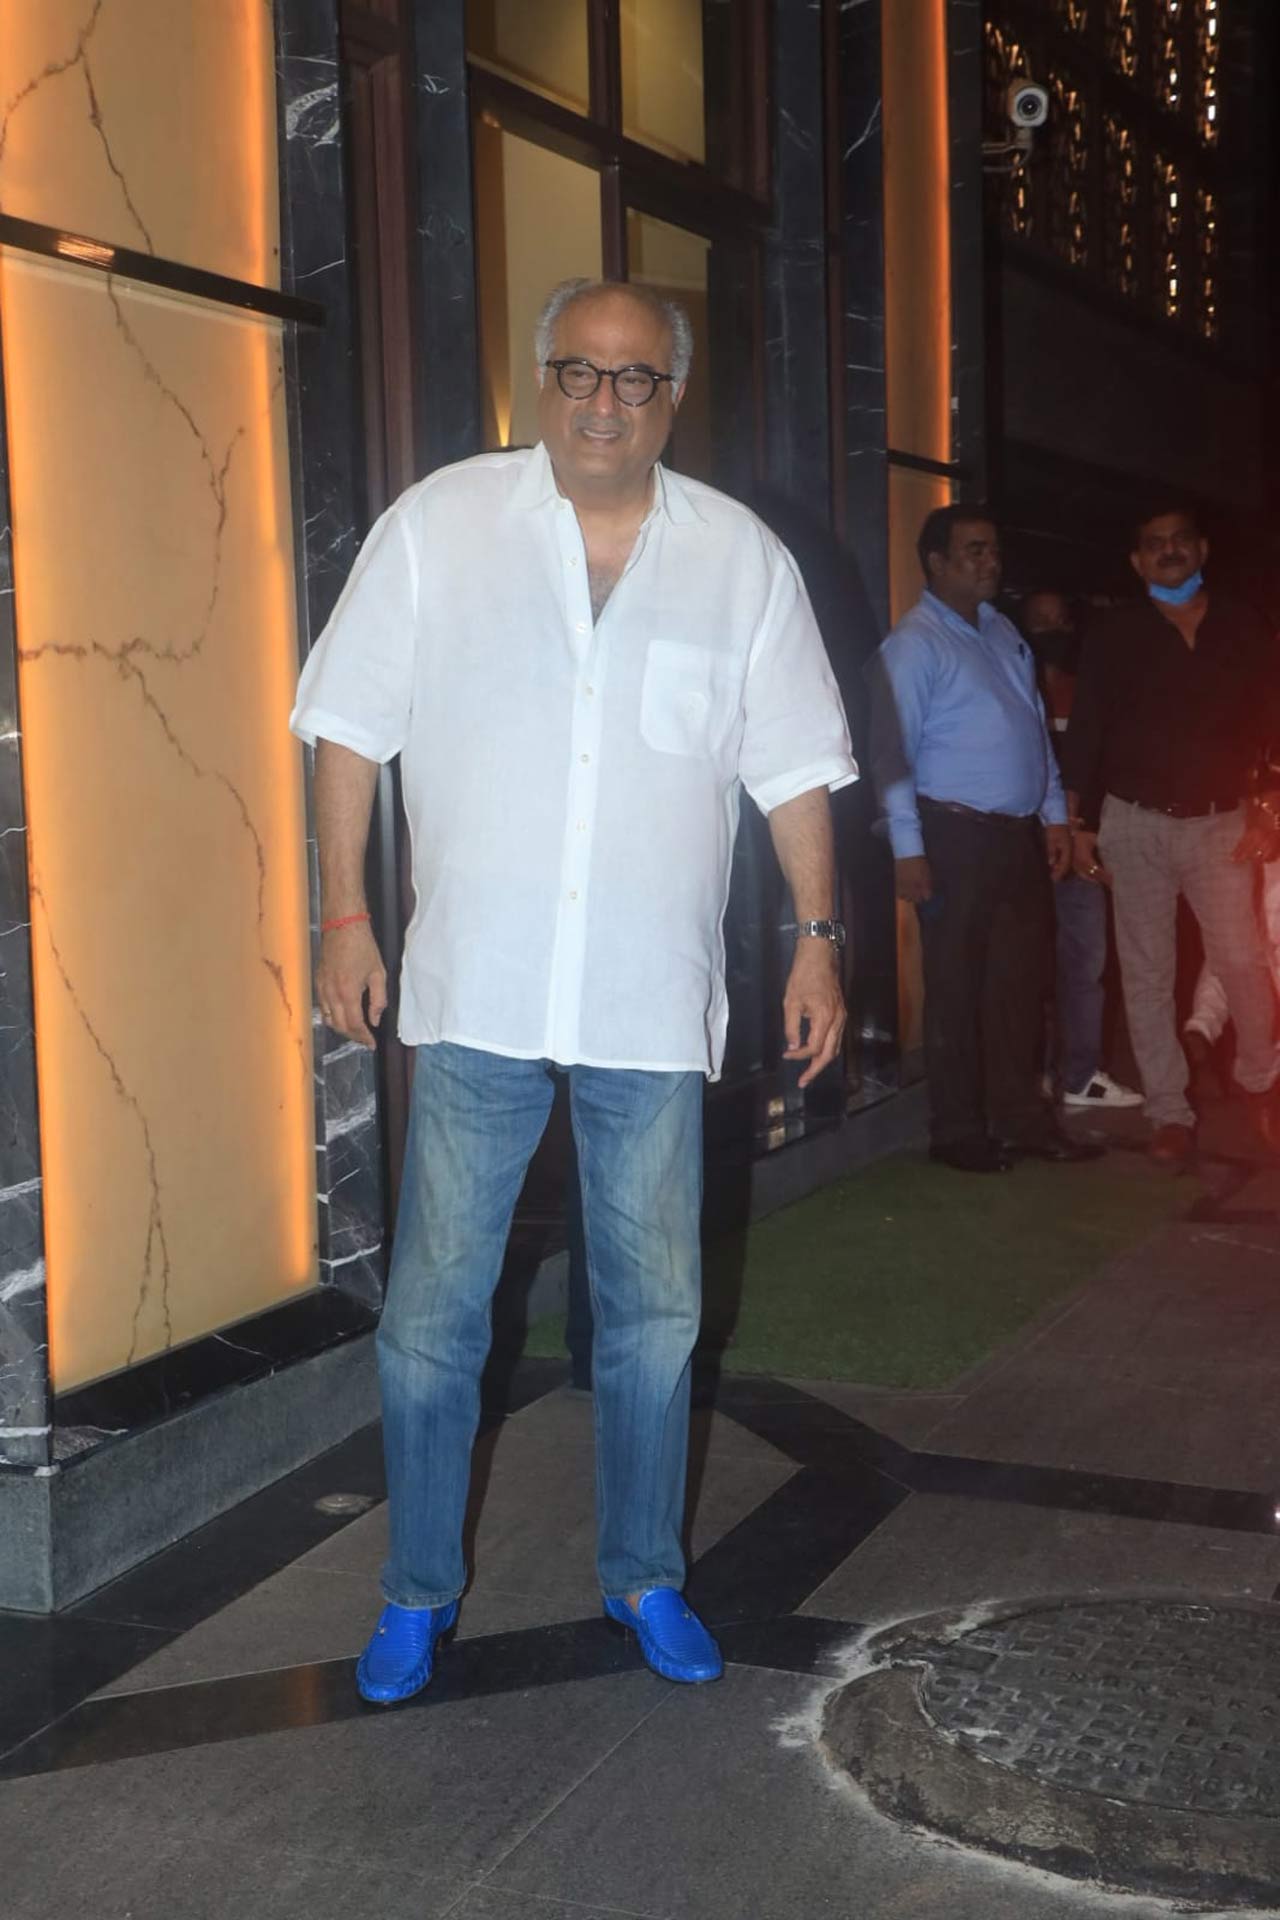 Boney Kapoor welcomed all the guests personally and also posed for the shutterbugs as he greeted Khushi’s pals at the party. The popular Bollywood producer is currently gearing up for Ajay Devgn's 'Maidaan.'